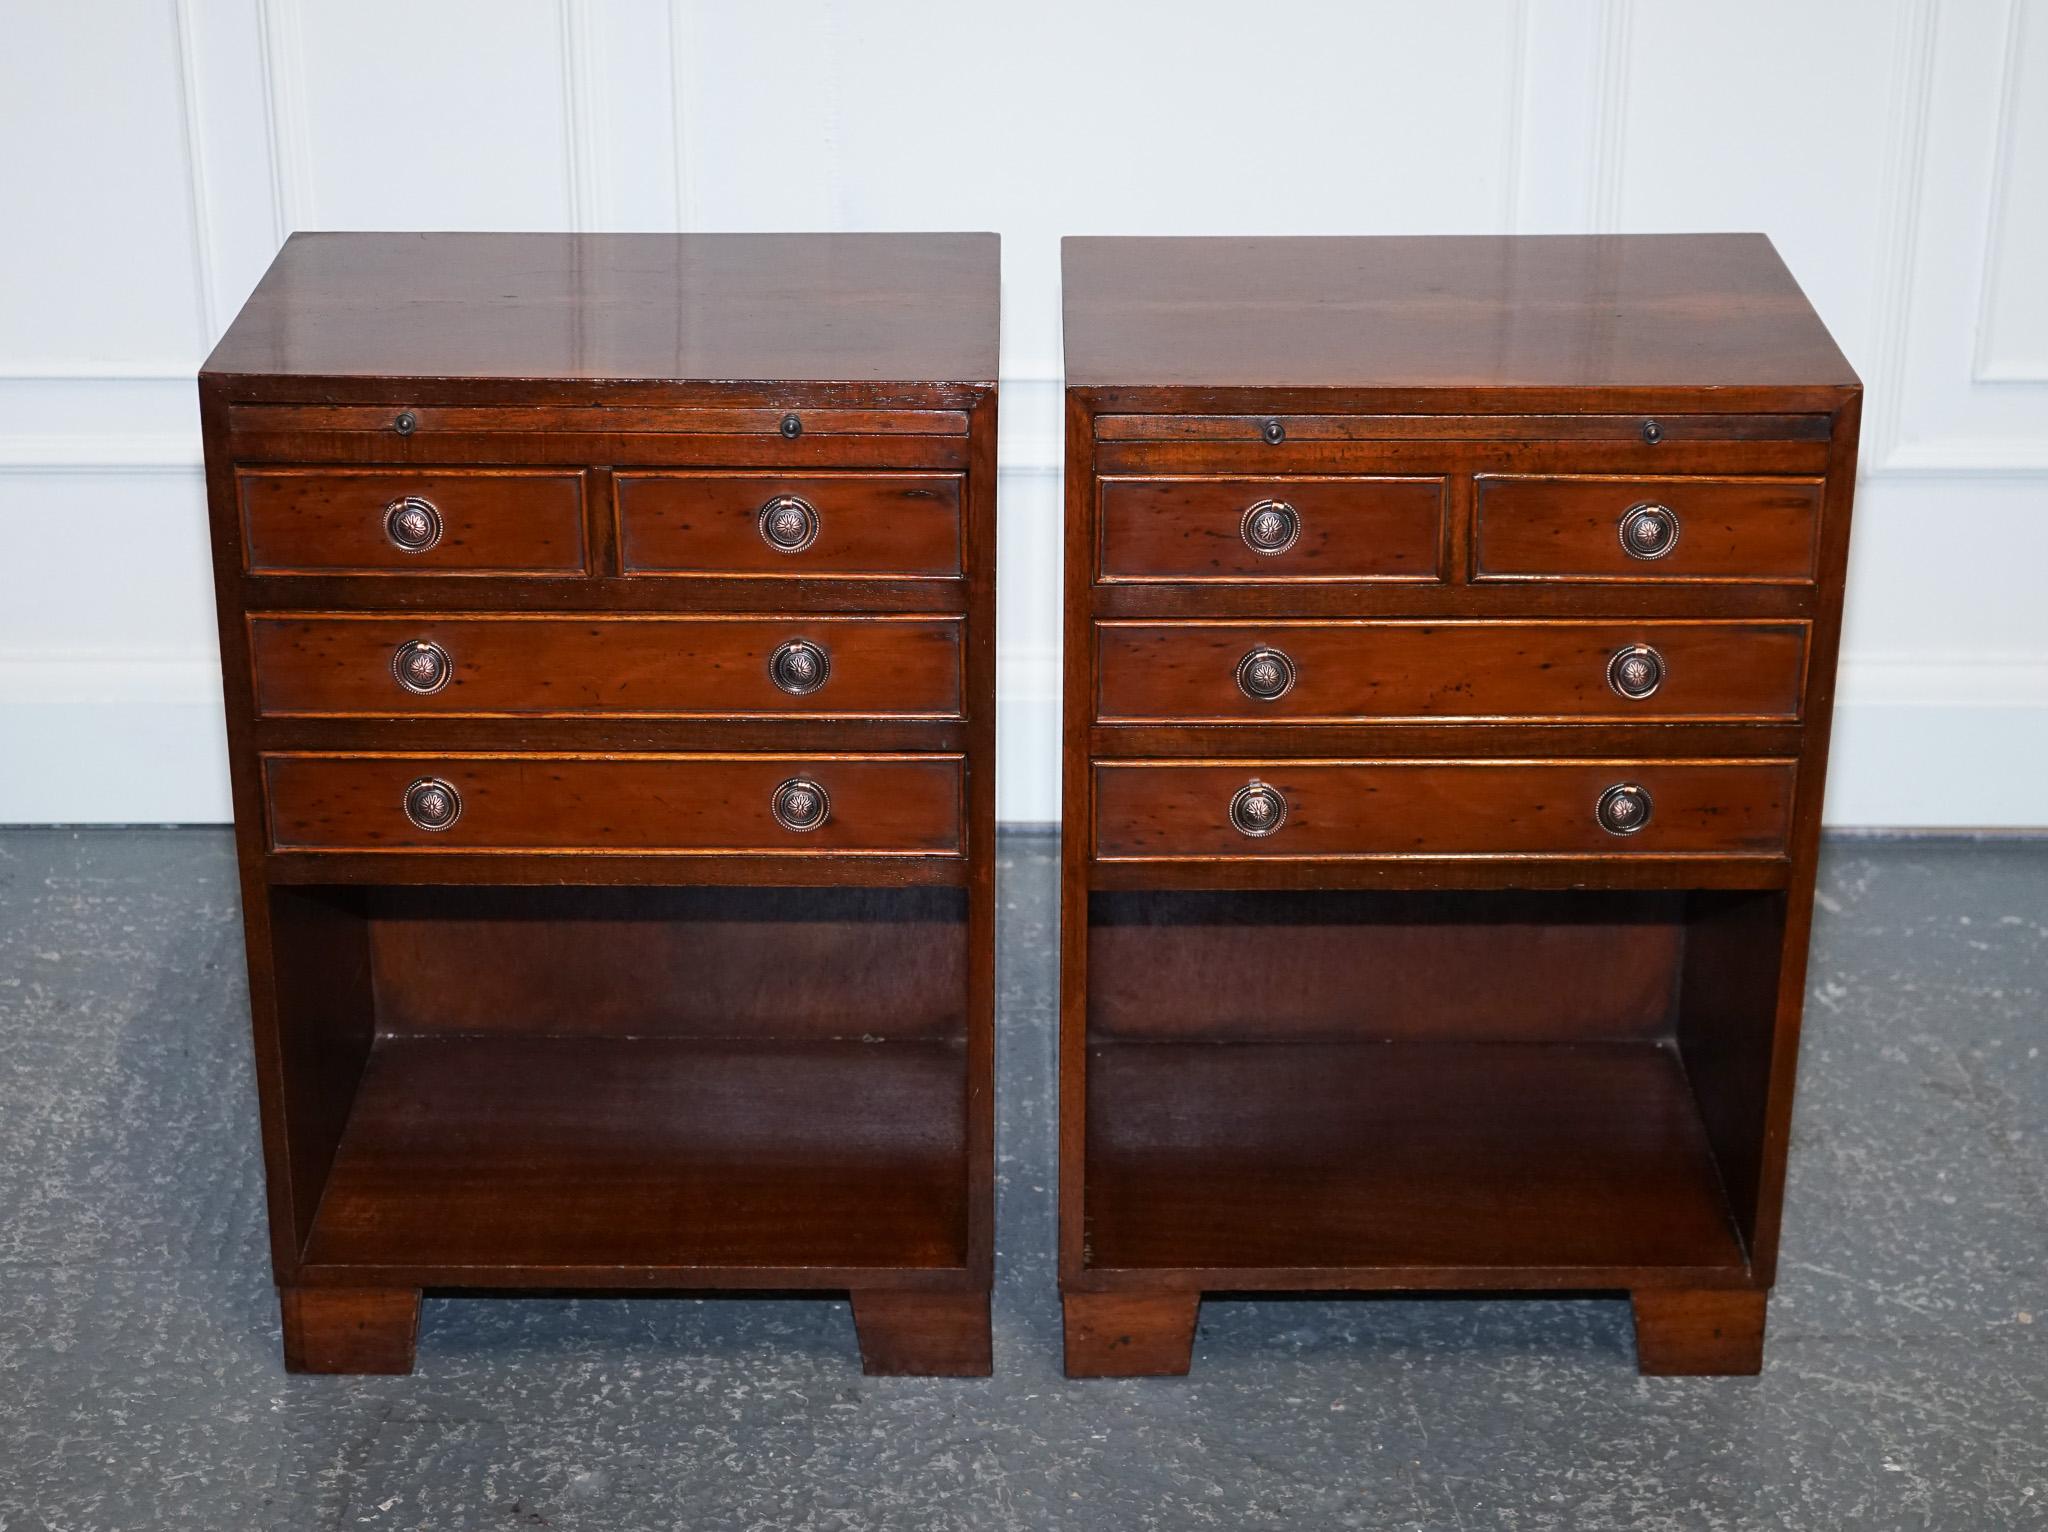 Hand-Crafted GORGEOUS PAIR OF HARDWOOD GEORGIAN STYLE NIGHTSTANDS WiTH DRAWERS